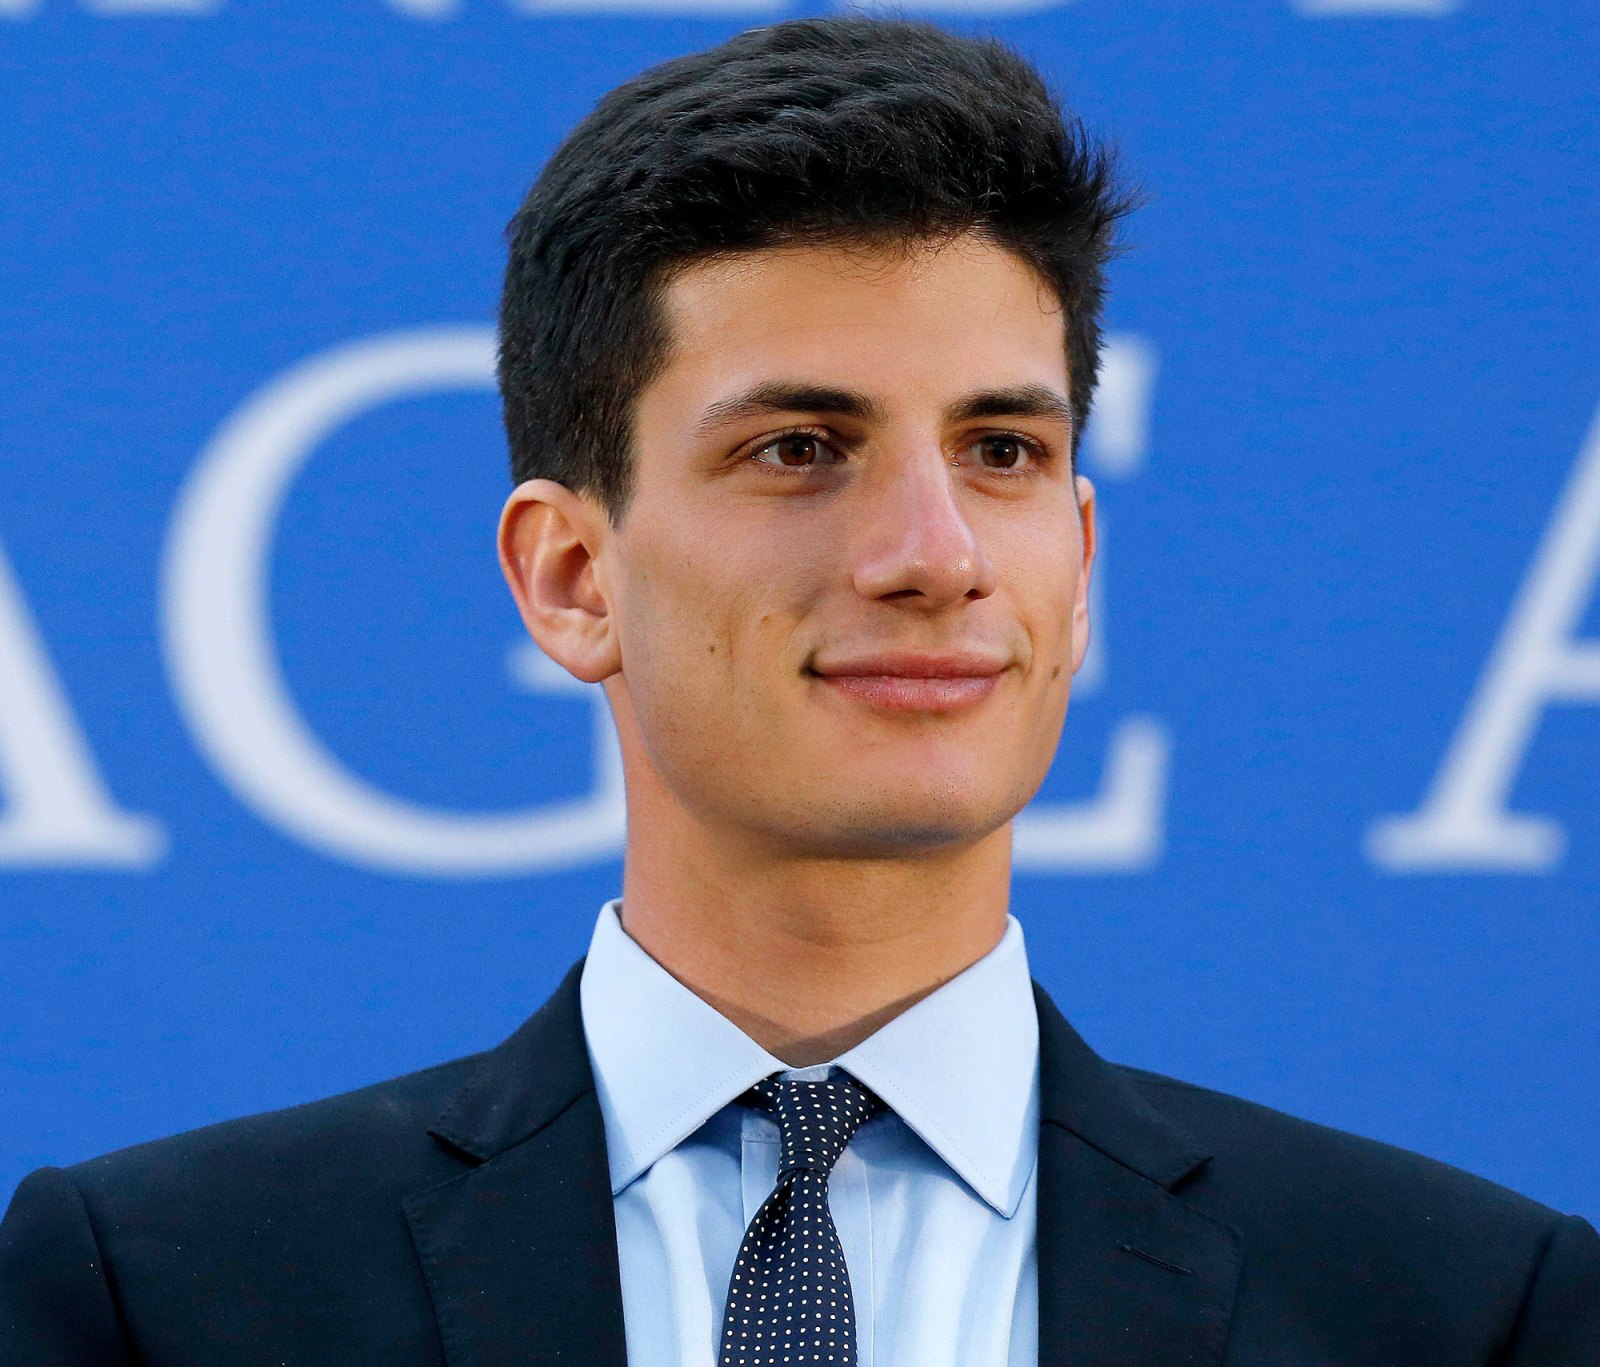 Jack Schlossberg 5 Things to Know About John F. Kennedy Grandson 3